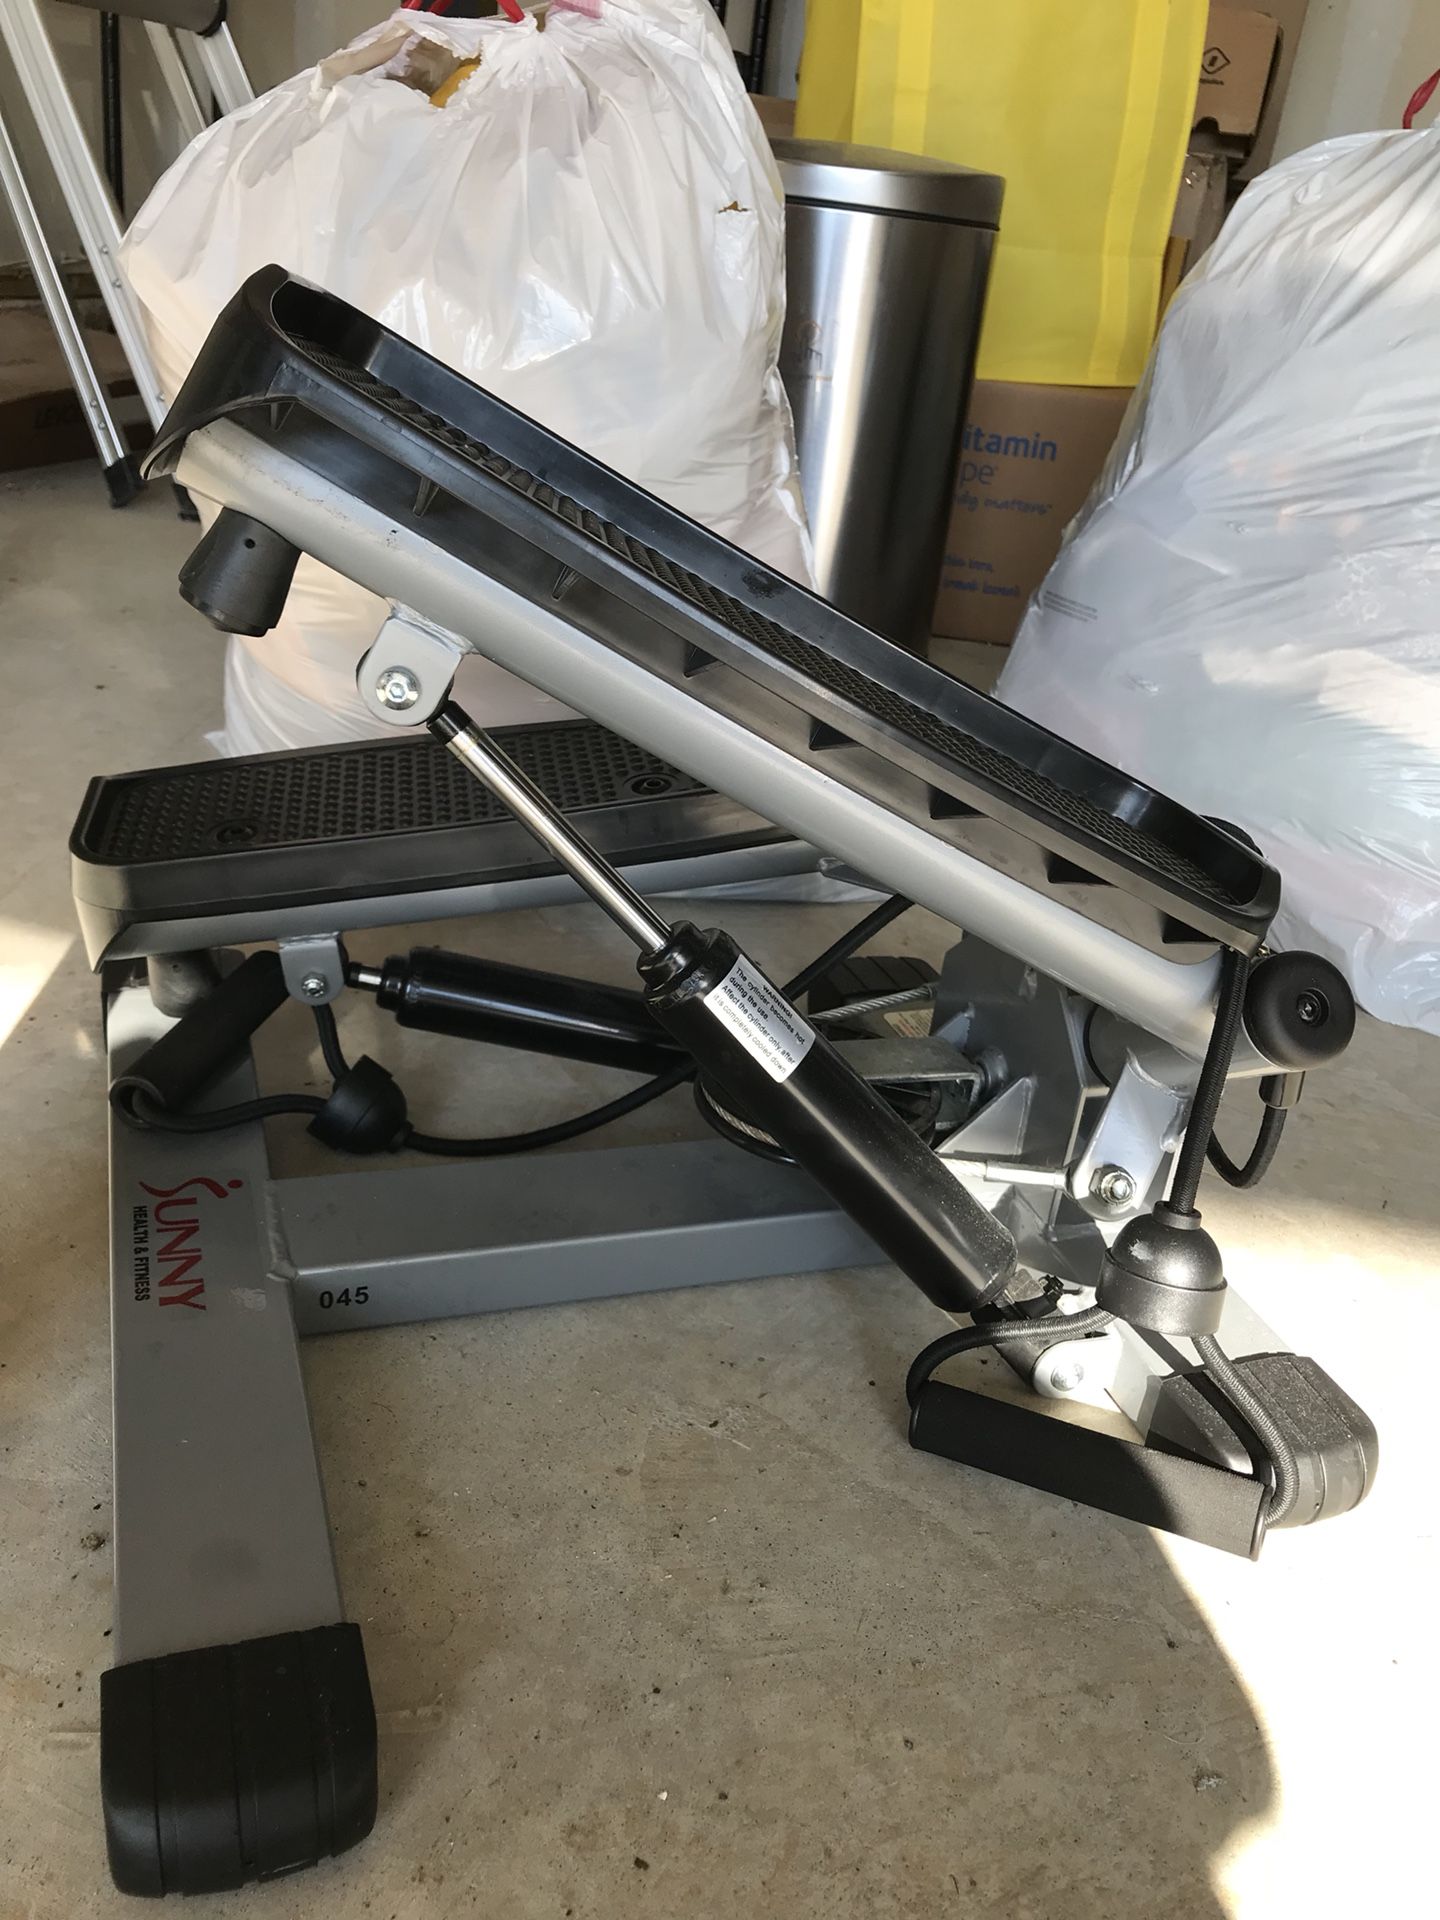 Step exercise machine with flex dumble rope